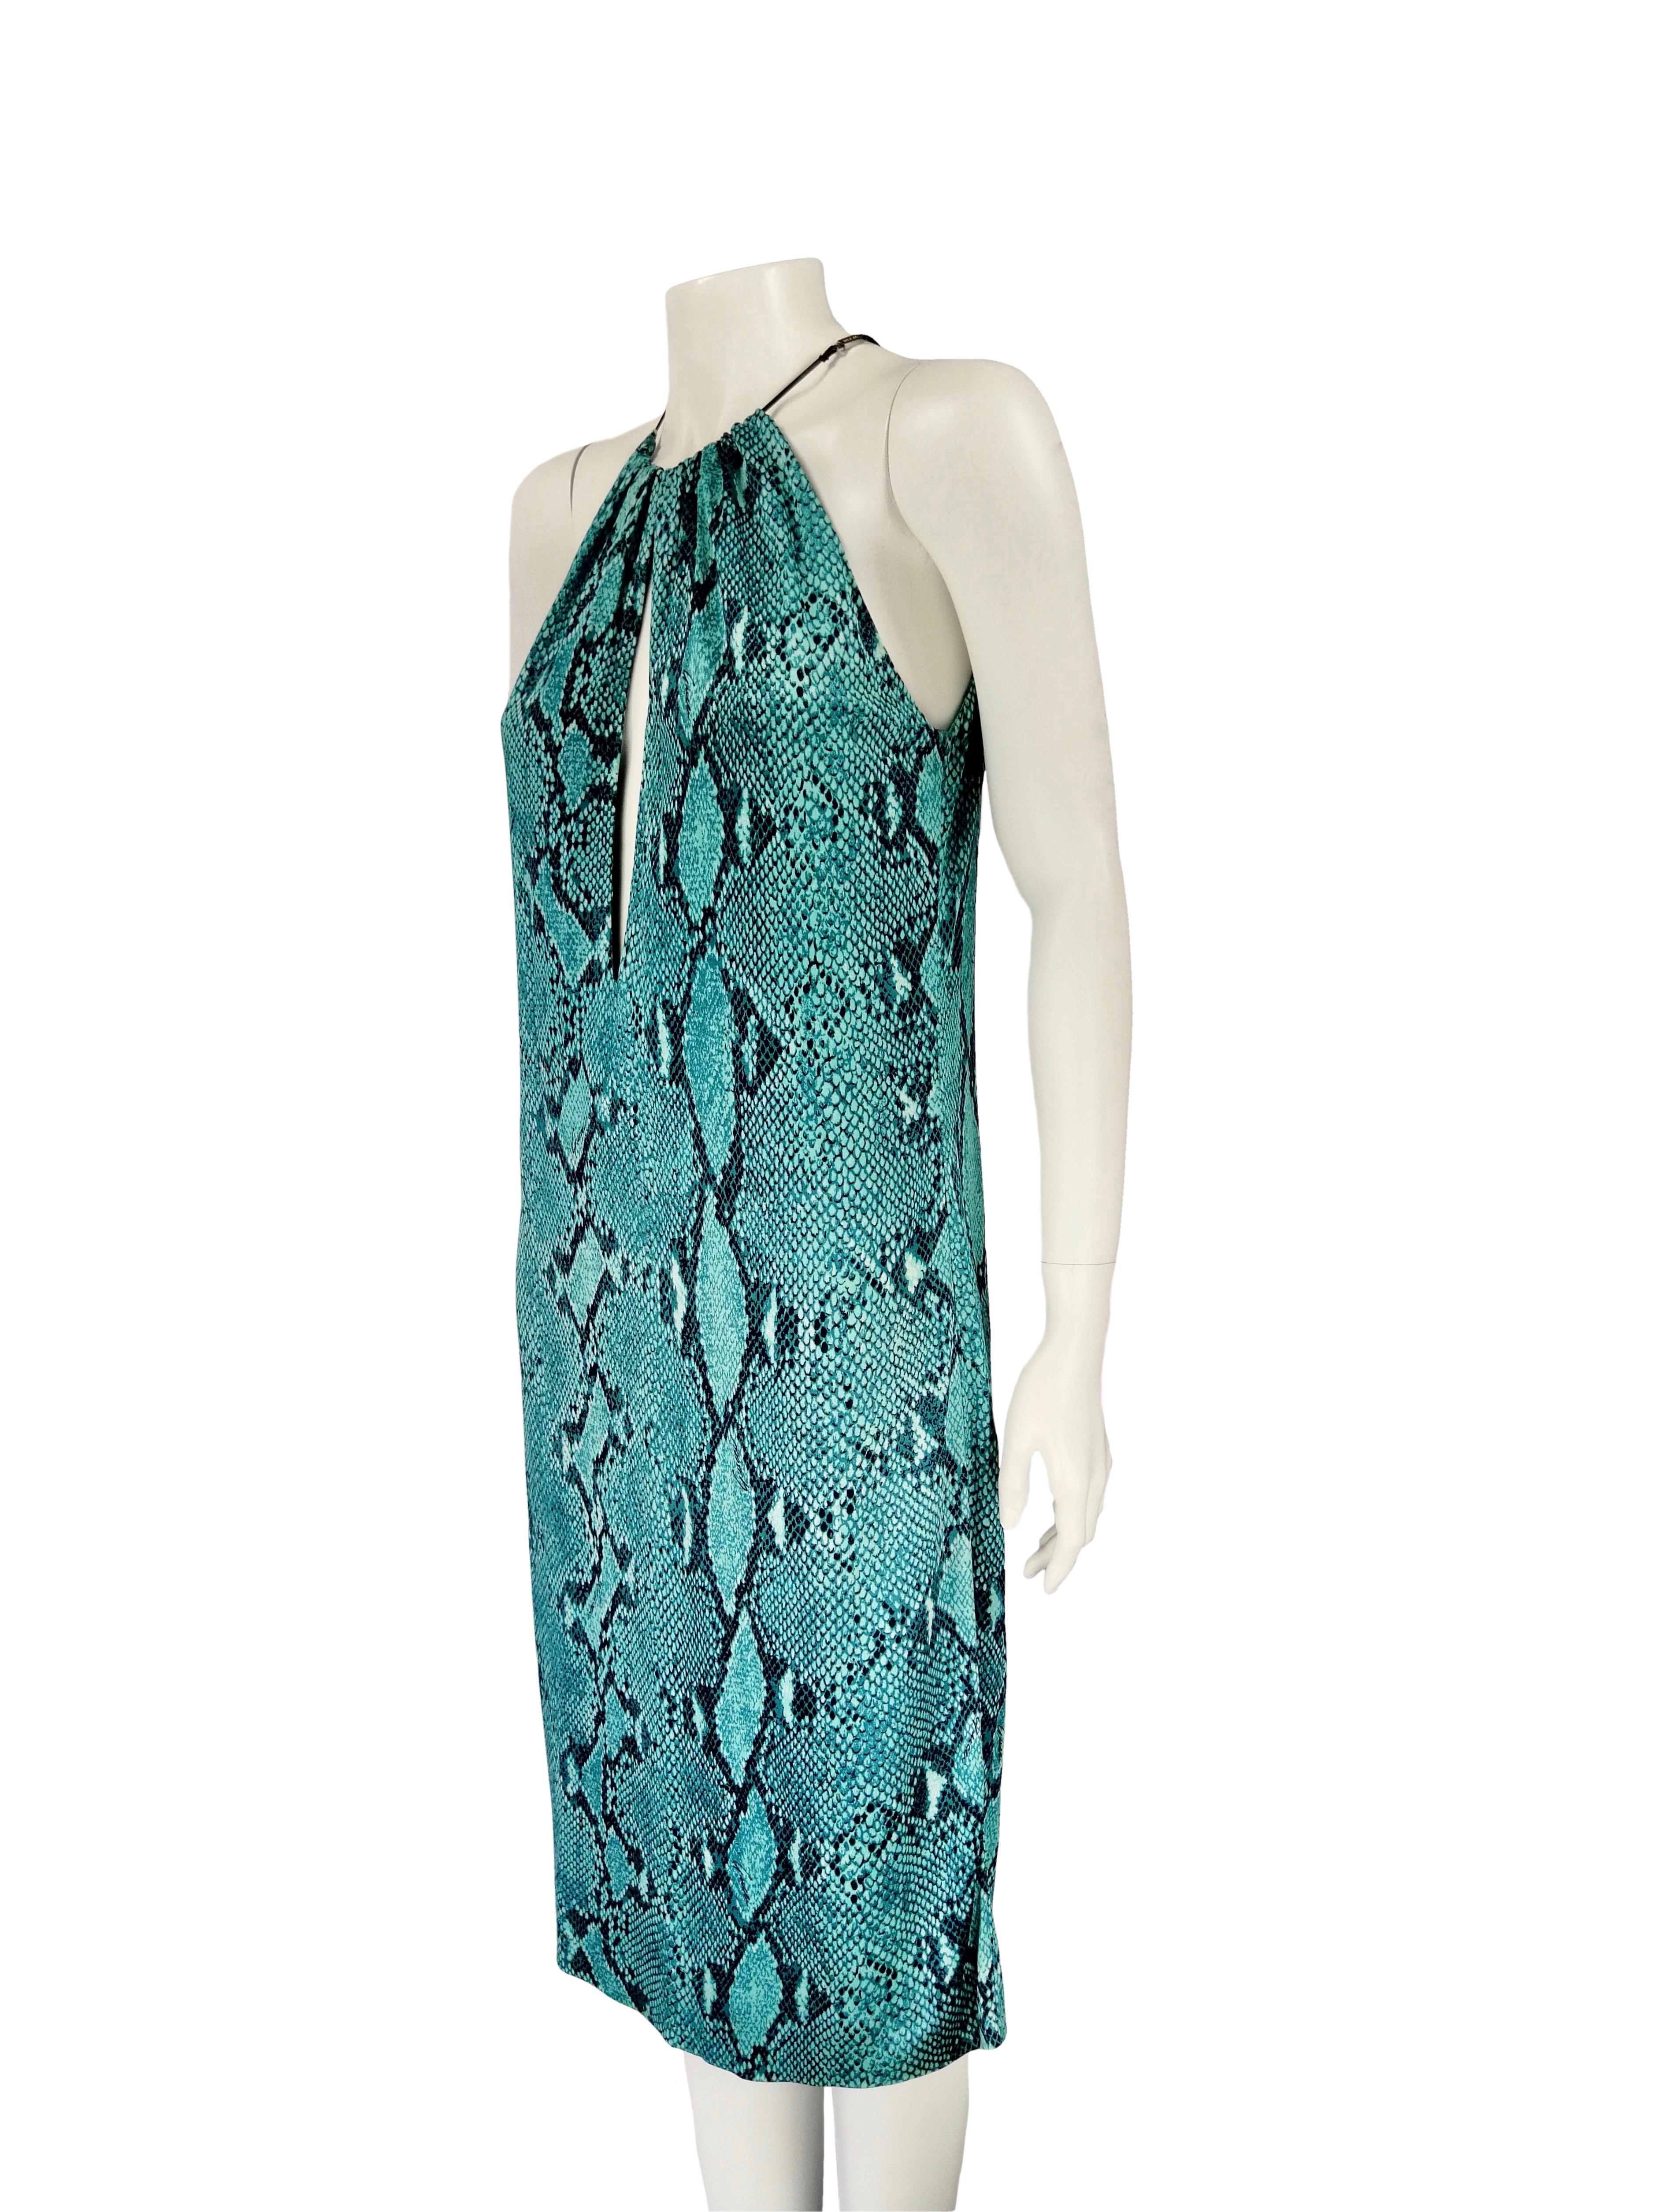 Women's Tom Ford for Gucci python print dress SS 2000 For Sale